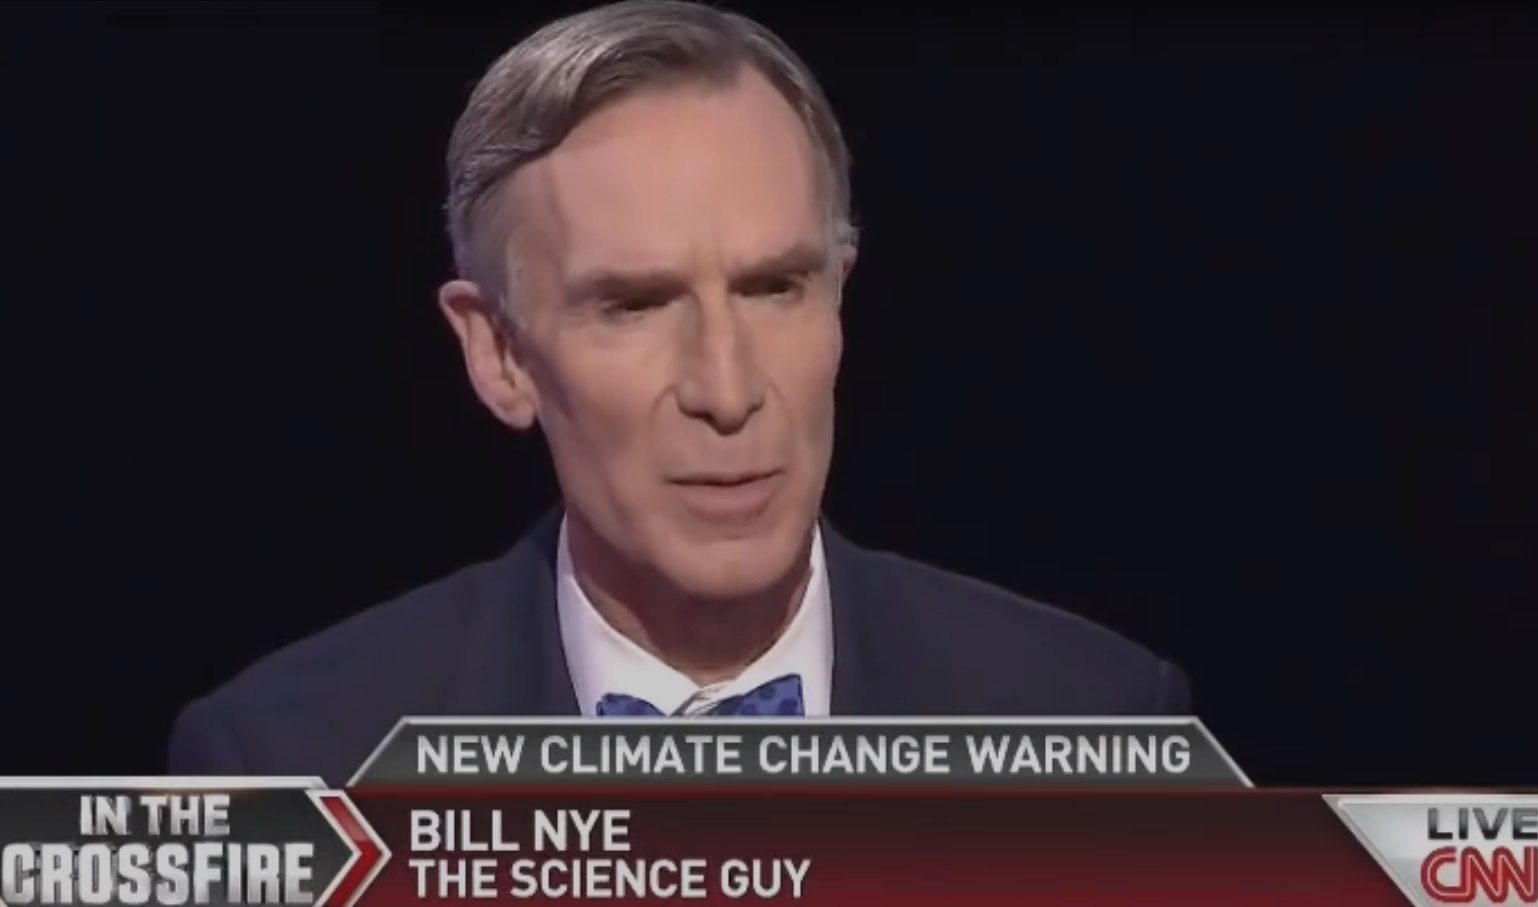 How can Bill Nye understand anything about science when he can’t even understand the U.S. Constitution?